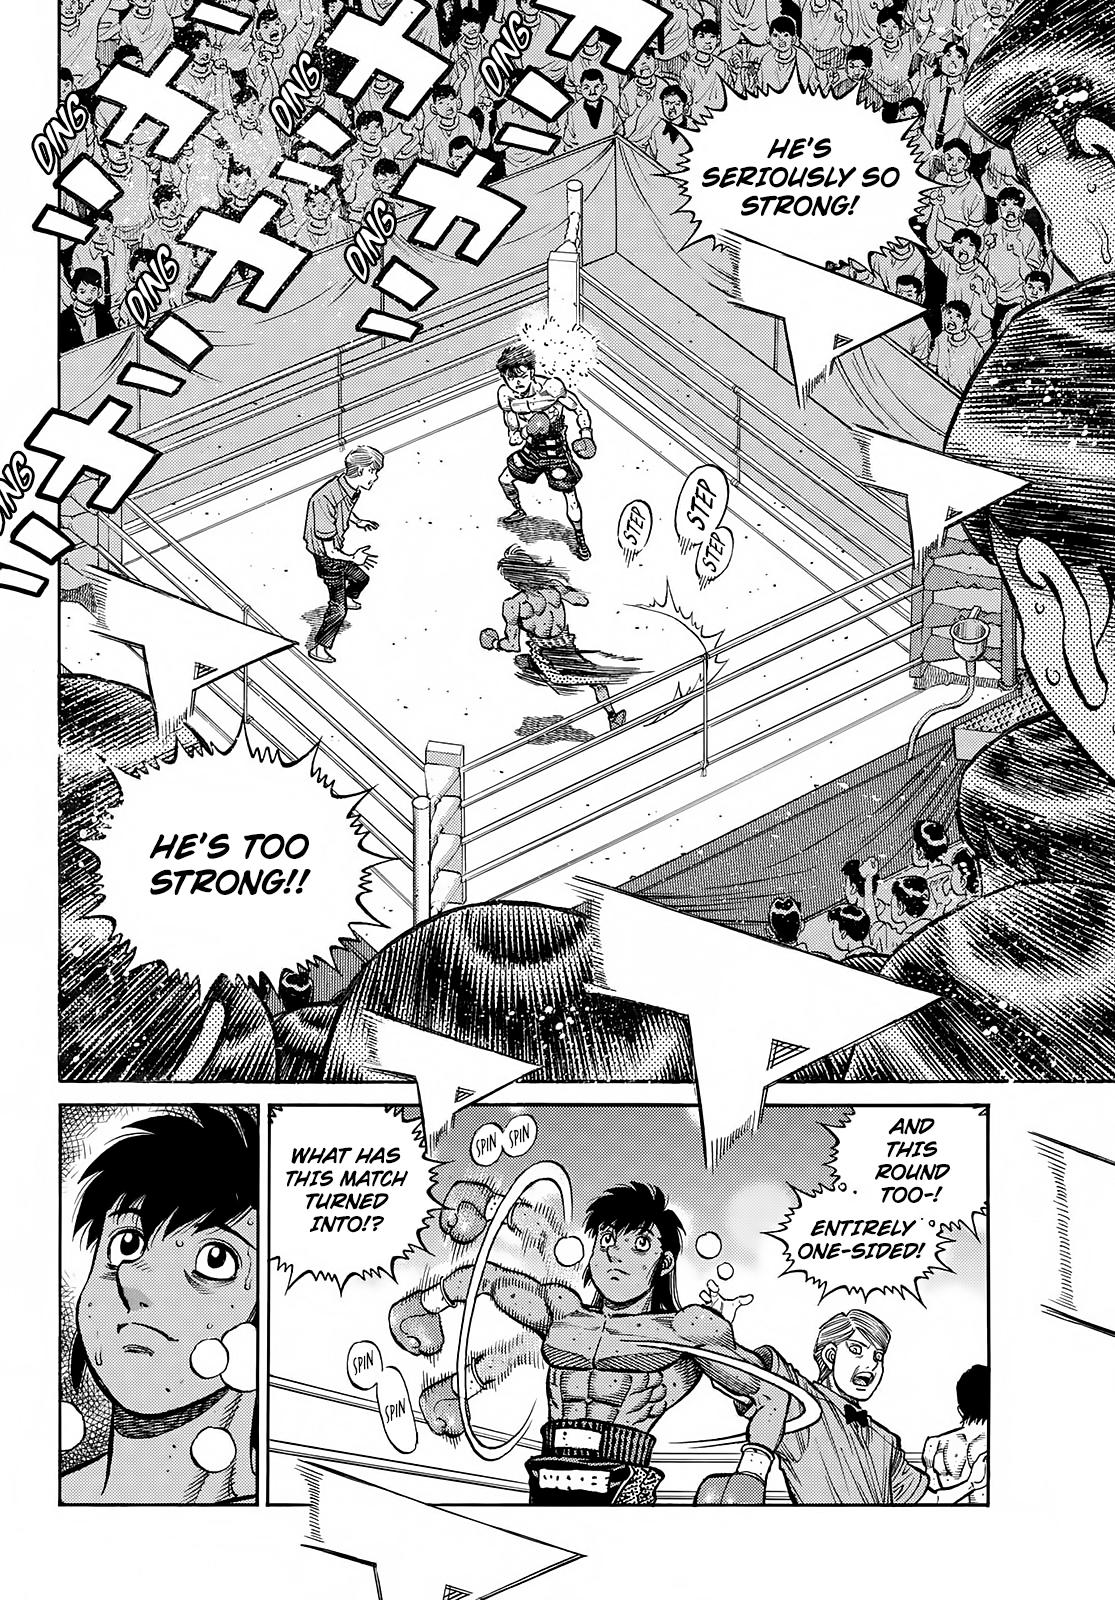 Read Hajime No Ippo Chapter 1402: The Gap Between Their Camps - Manganelo